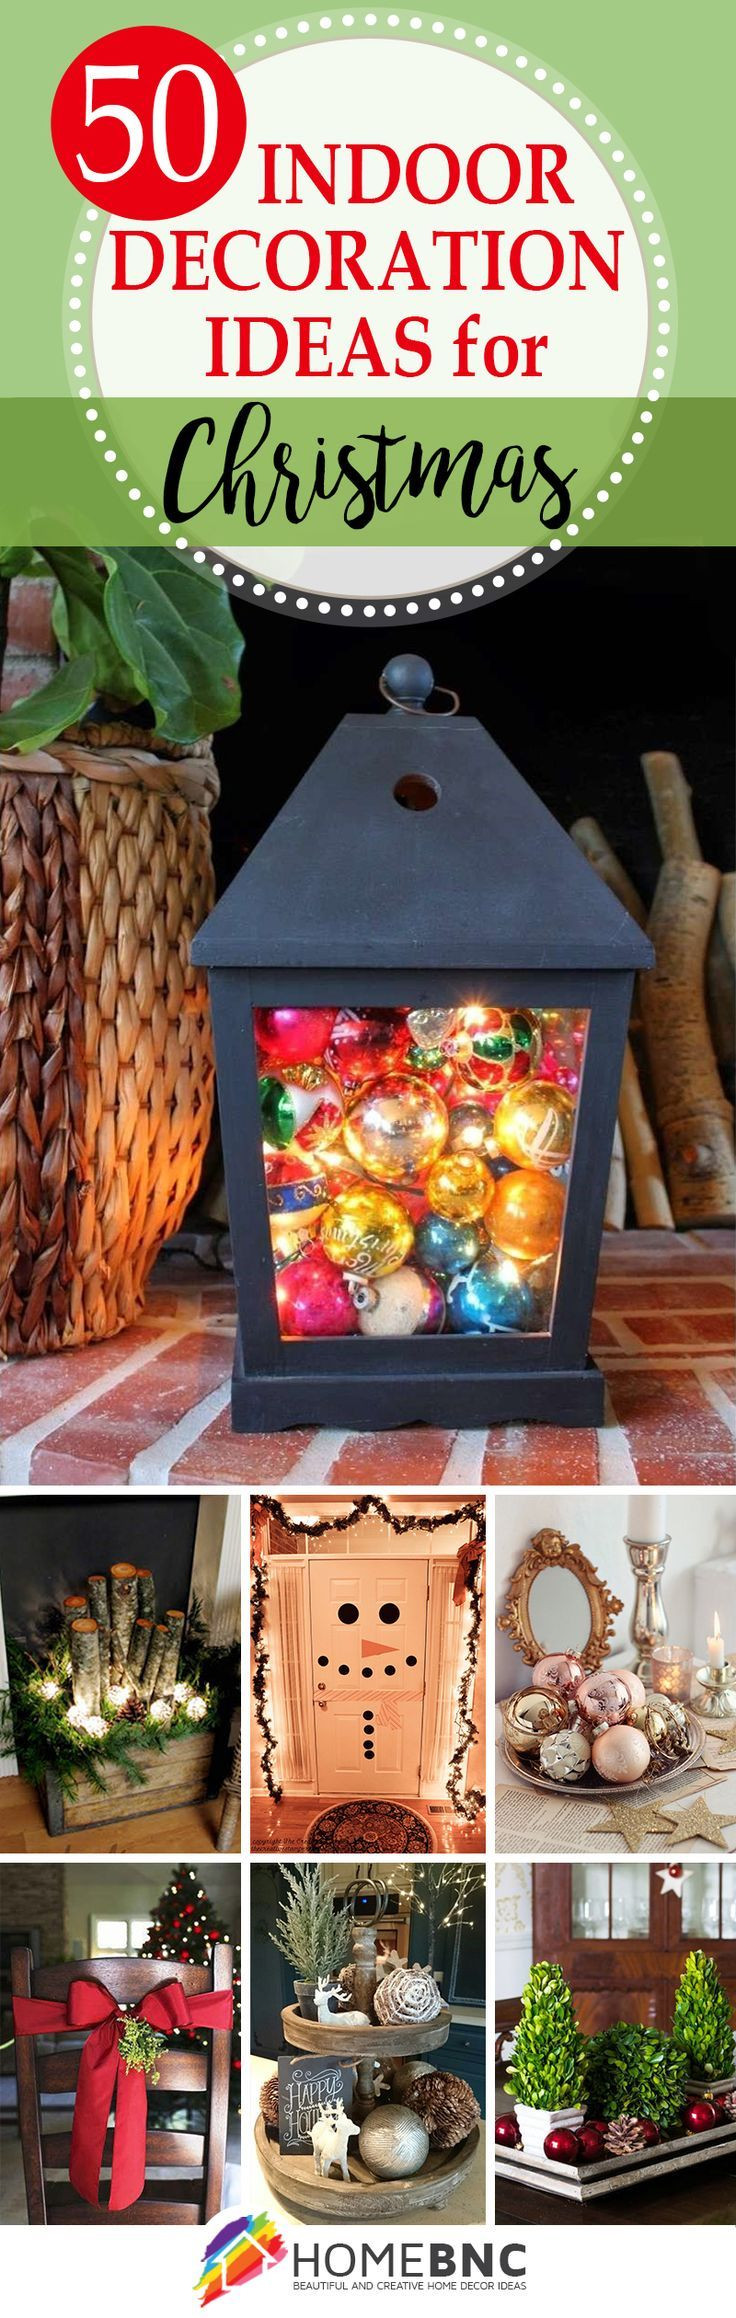 Large Indoor Christmas Decorations
 Best 25 Christmas topiary ideas on Pinterest